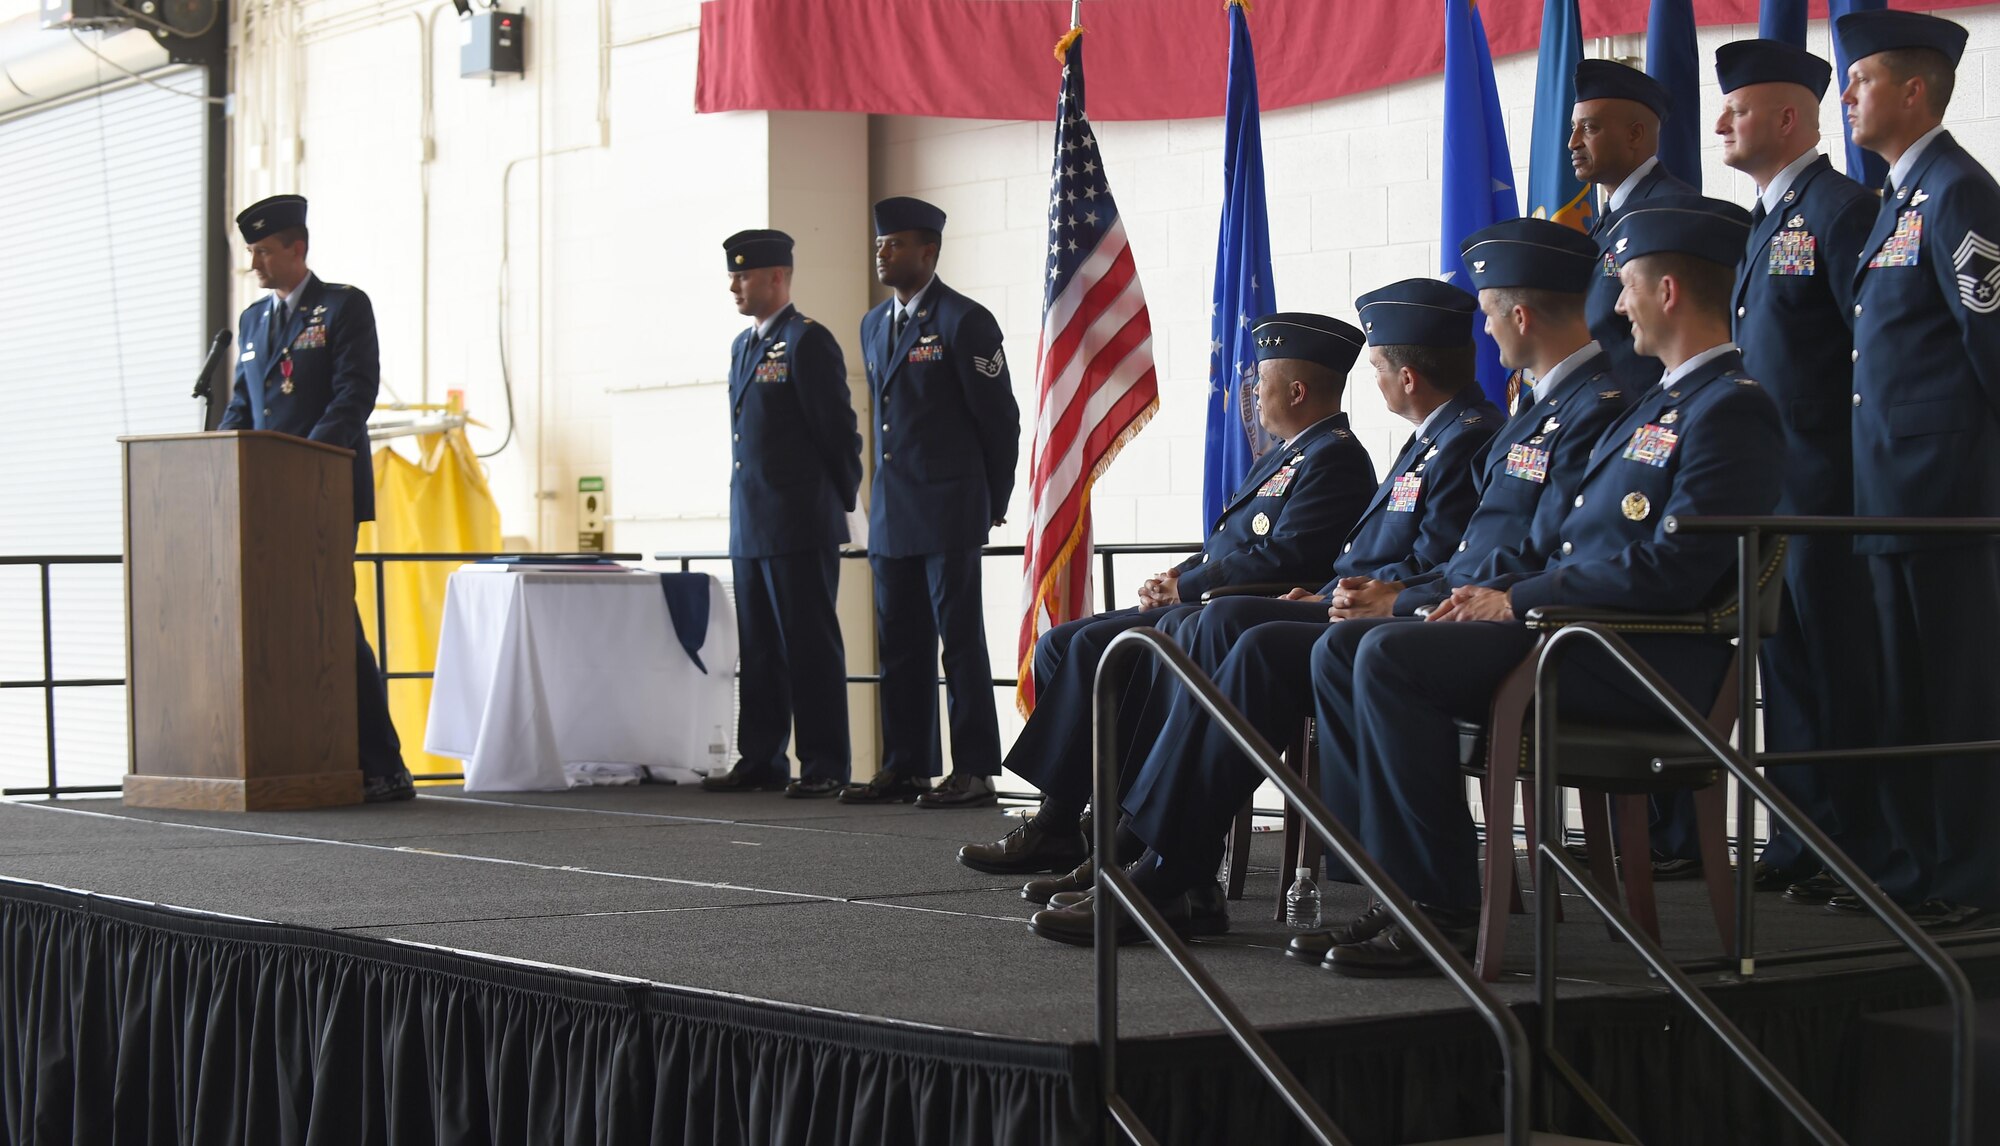 U.S. Air Force Col. Stephen Hodge, 317th Airlift Group commander, speaks to Dyess Airmen, family members and civic leaders at Dyess Air Force Base, Texas, July 6, 2017. Hodge was awarded the Legion of Merit for his contributions and accomplishments while commanding the 317th AG and then relinquished command to Col. David Owens. (U.S. Air Force photo by Senior Airman Alexander Guerrero) 